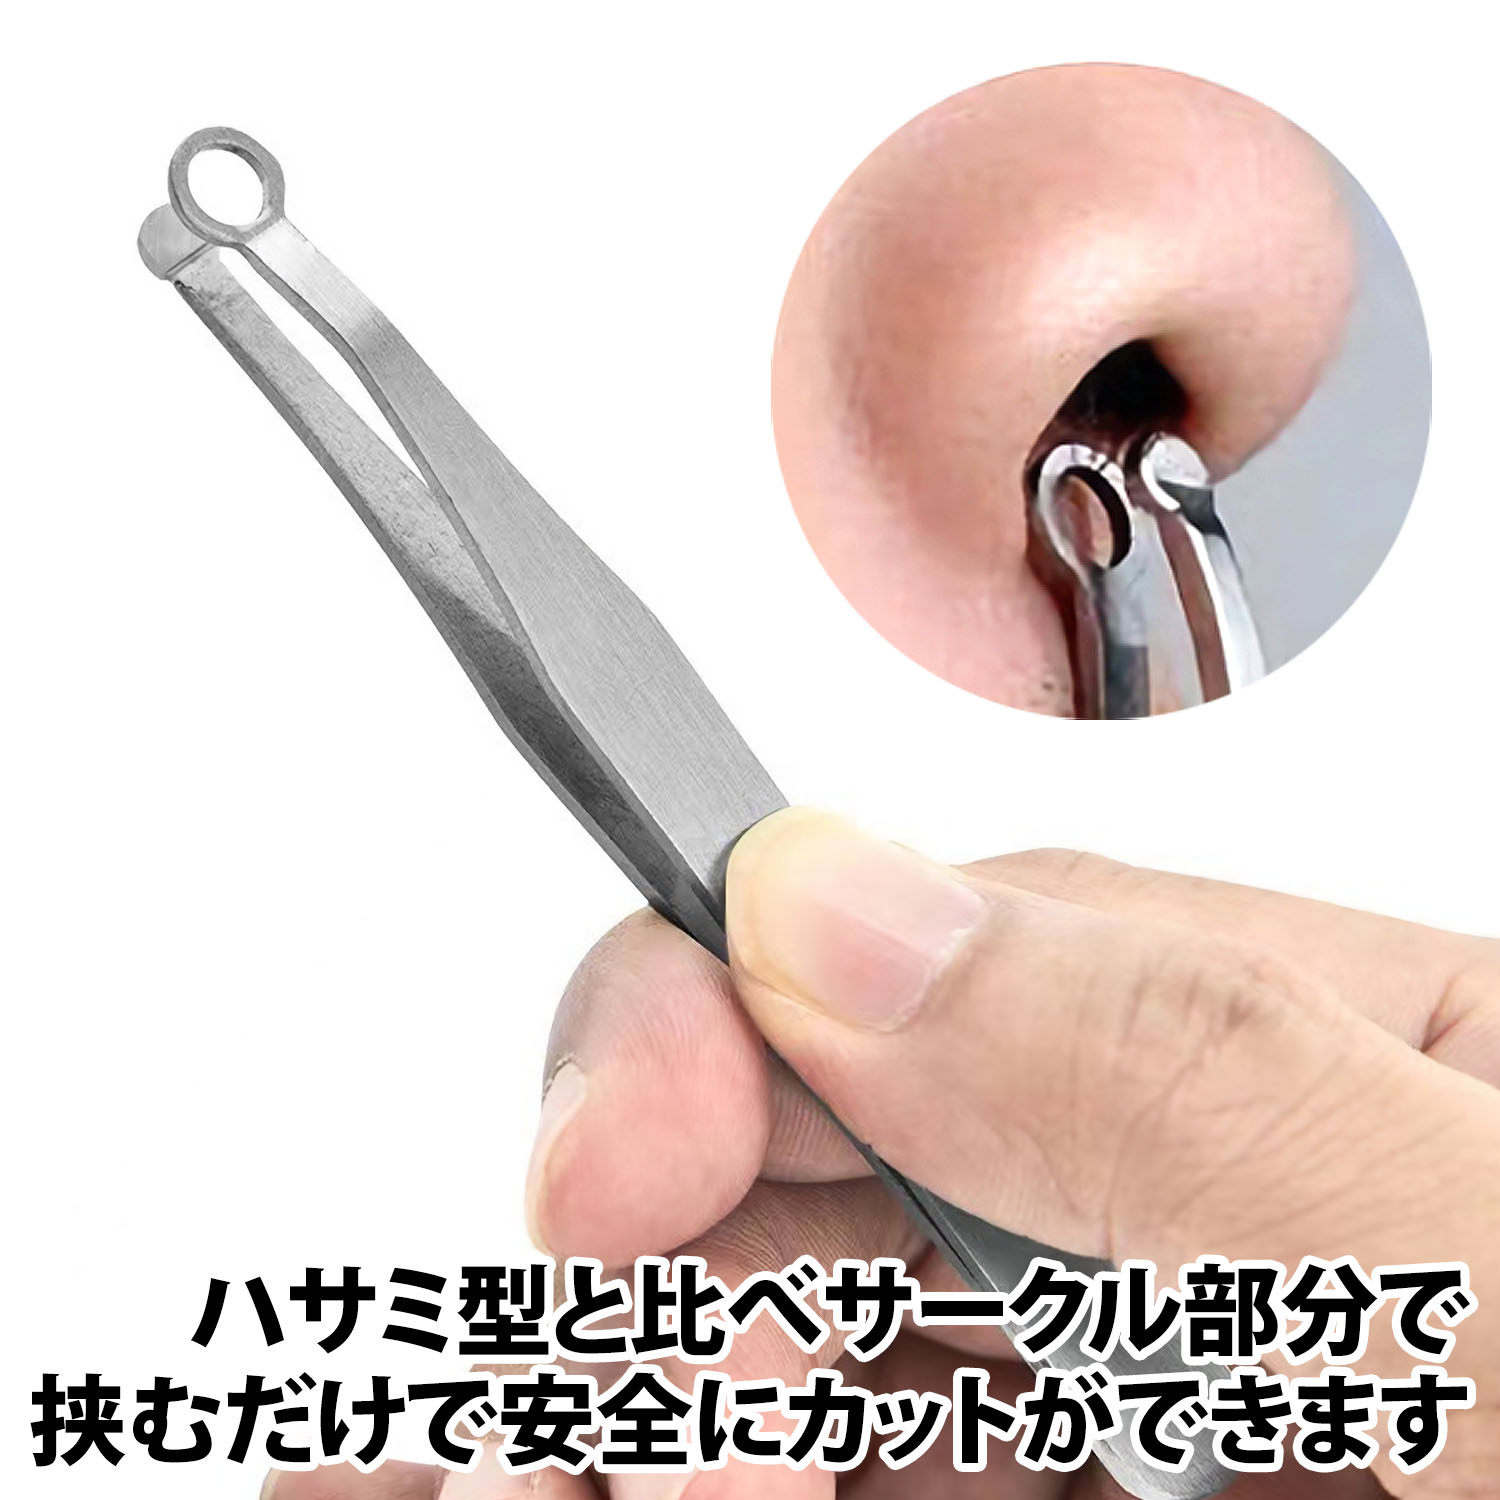 50%off coupon have nasal hair cutter washing with water OK nasal hair cut . nasal hair is .. nasal hair trimmer stainless steel man woman washing with water nasal hair processing ear wool processing manual small size carrying barber's clippers 